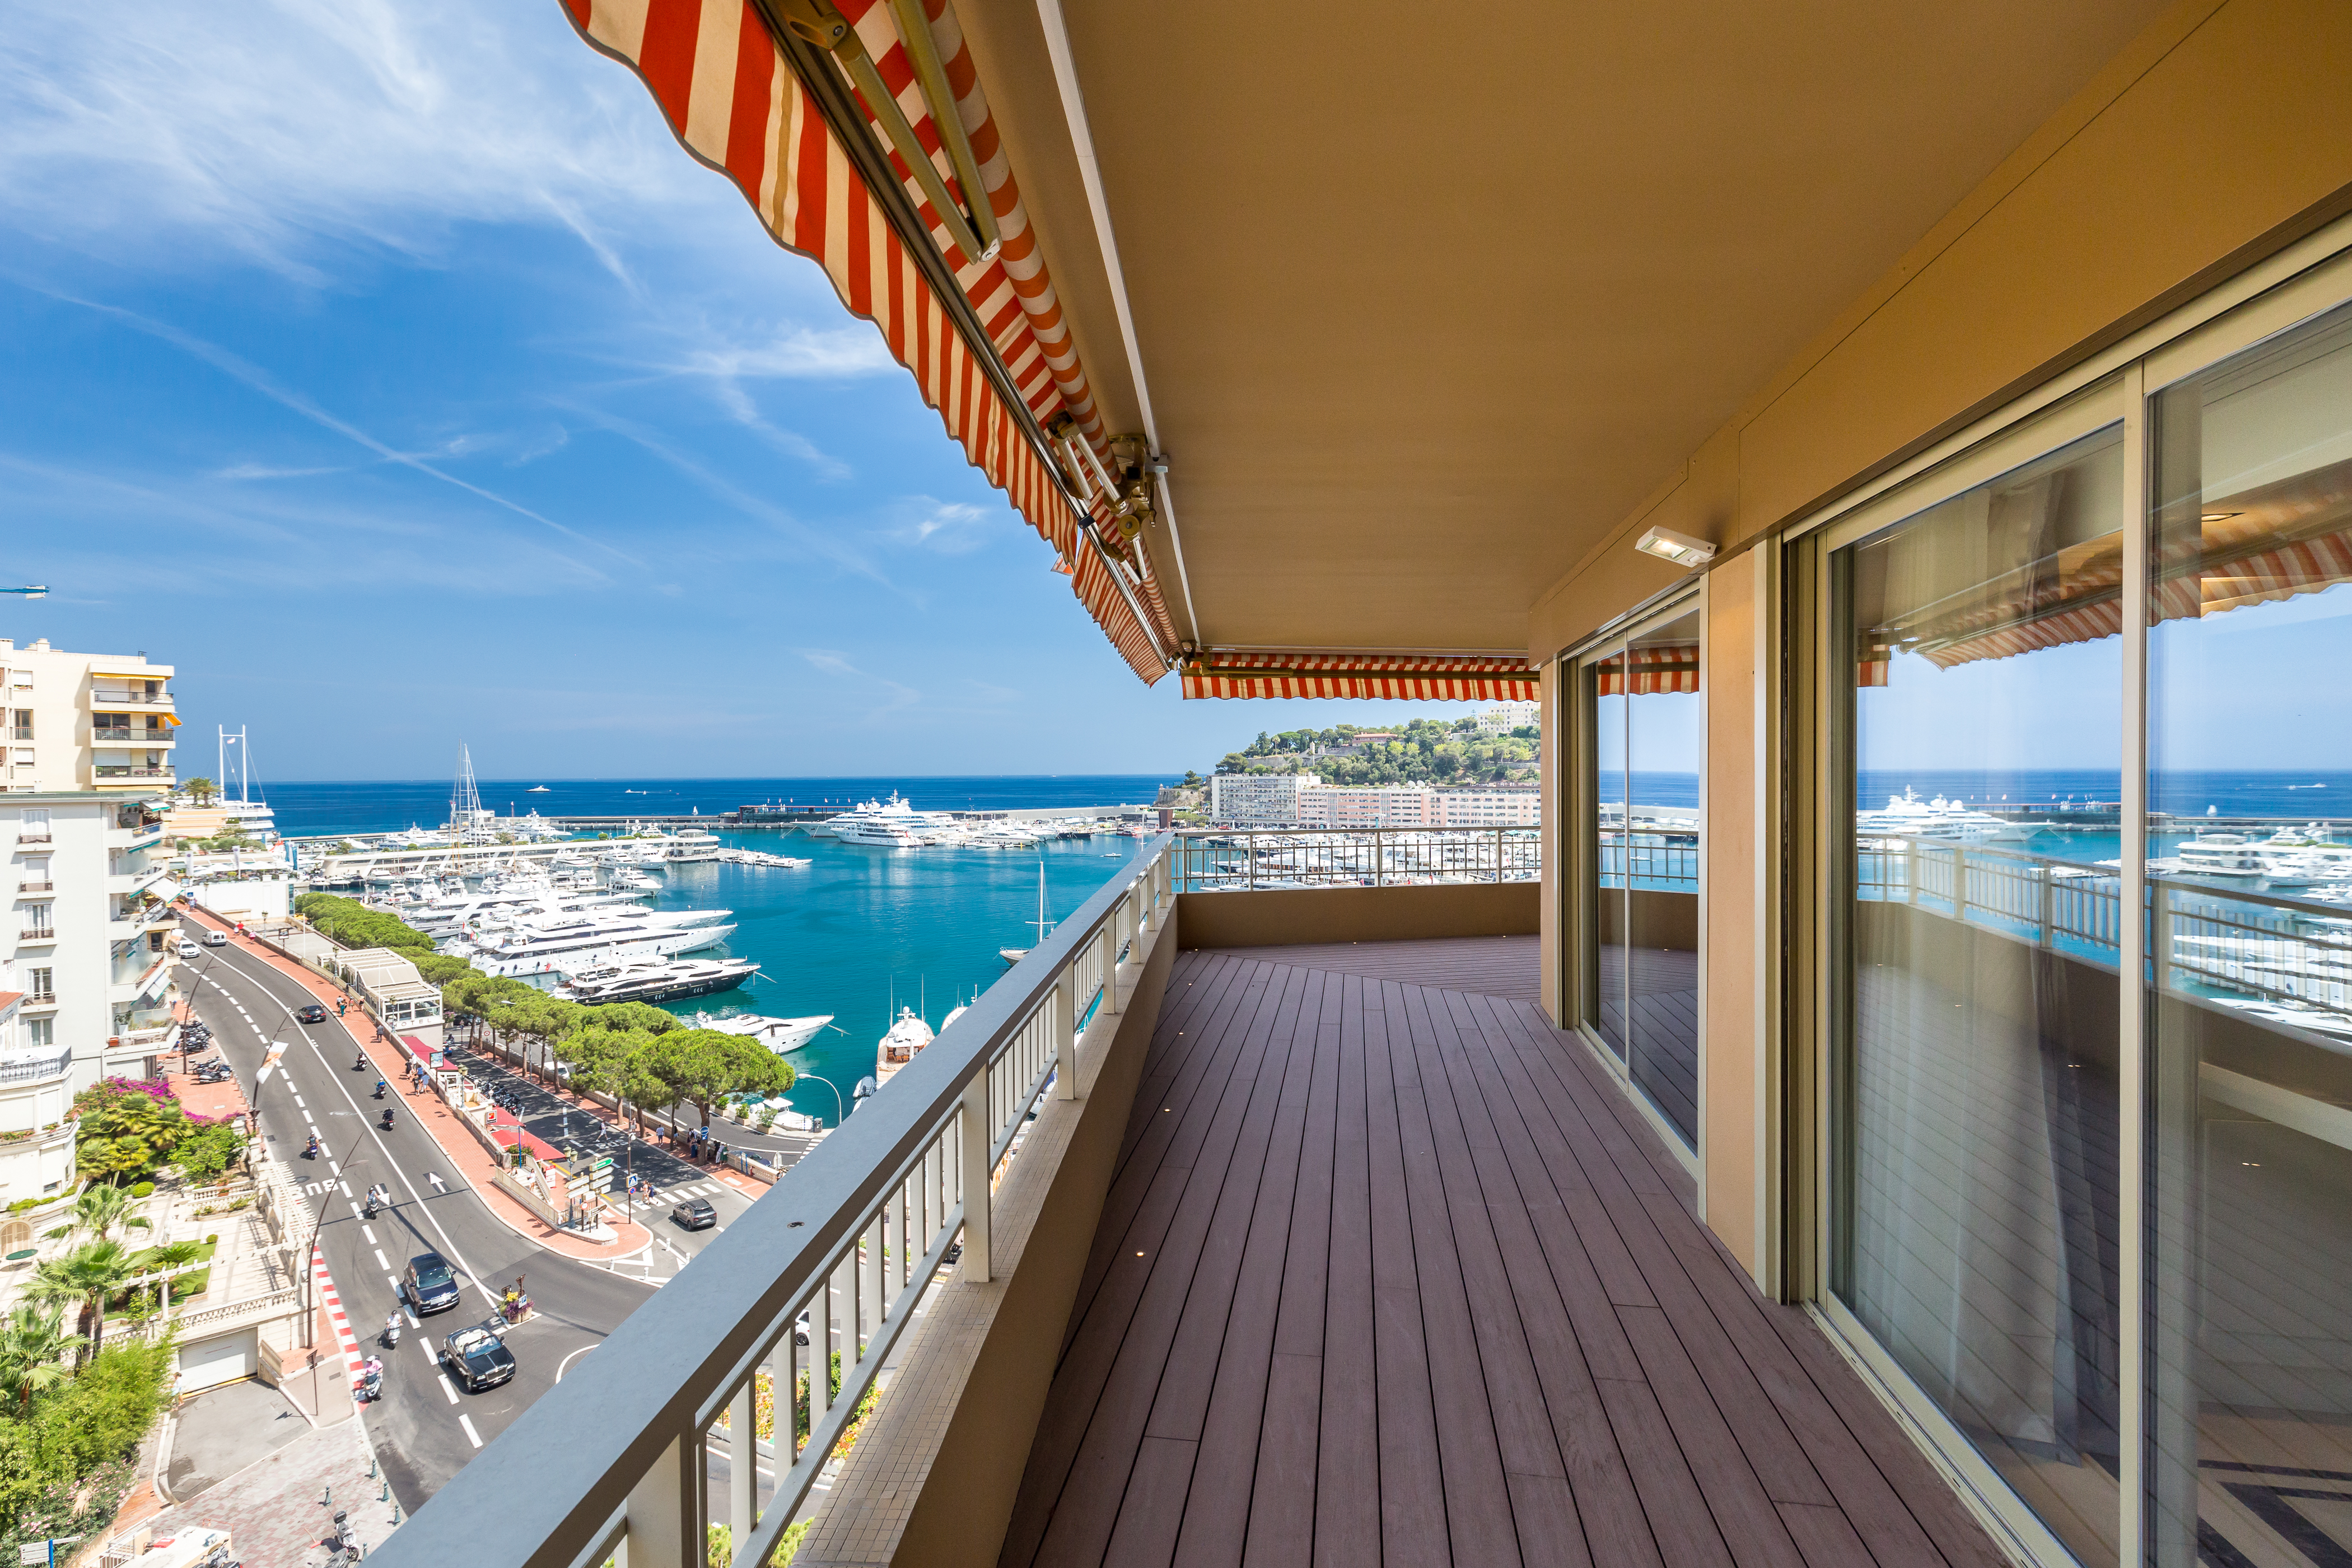 Apartments with outstanding sea views in Monaco